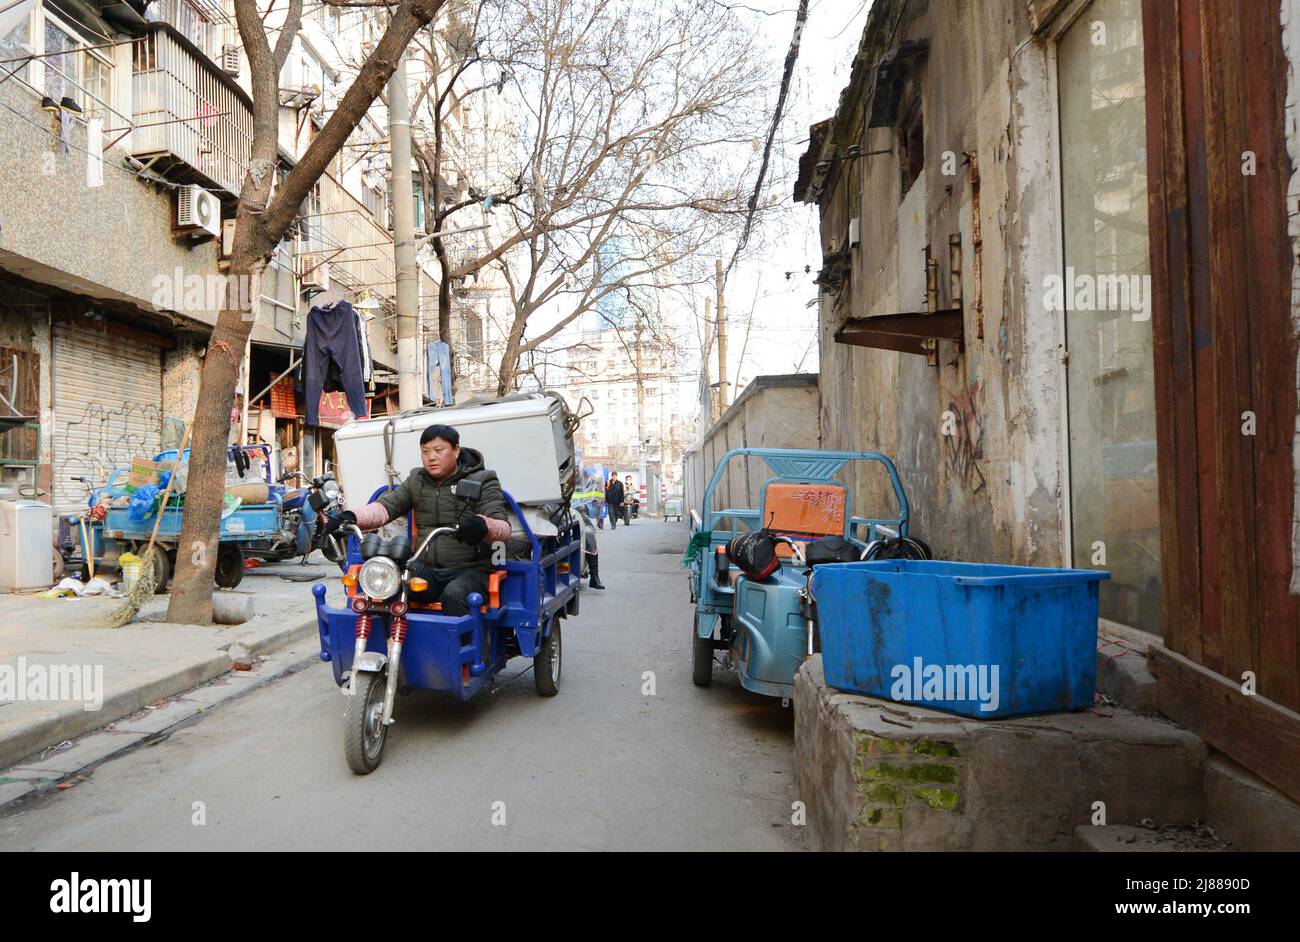 March 2017, Nanjing, China. Rapid changes in Nanjing as old Hutong neighborhoods are being demolished and make way for new modern buildings. Stock Photo